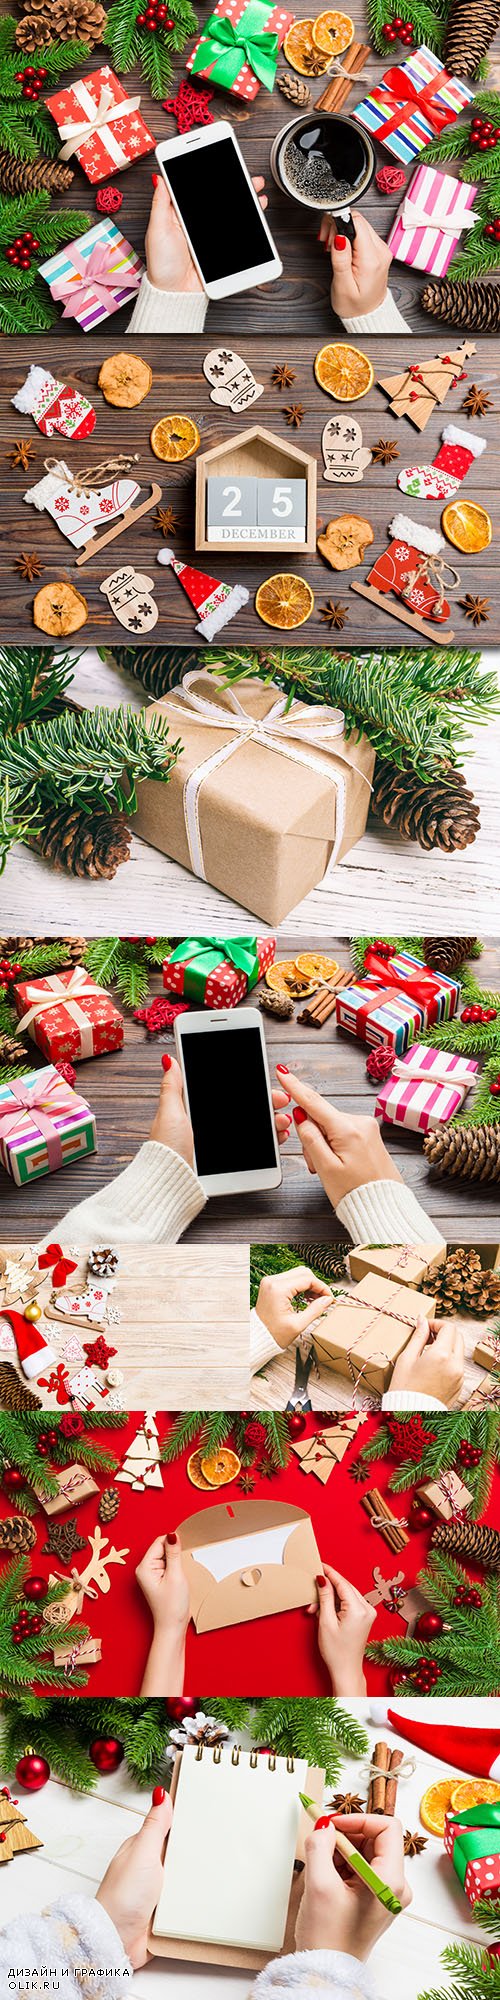 Christmas hand with gifts and iPhone decorative composition